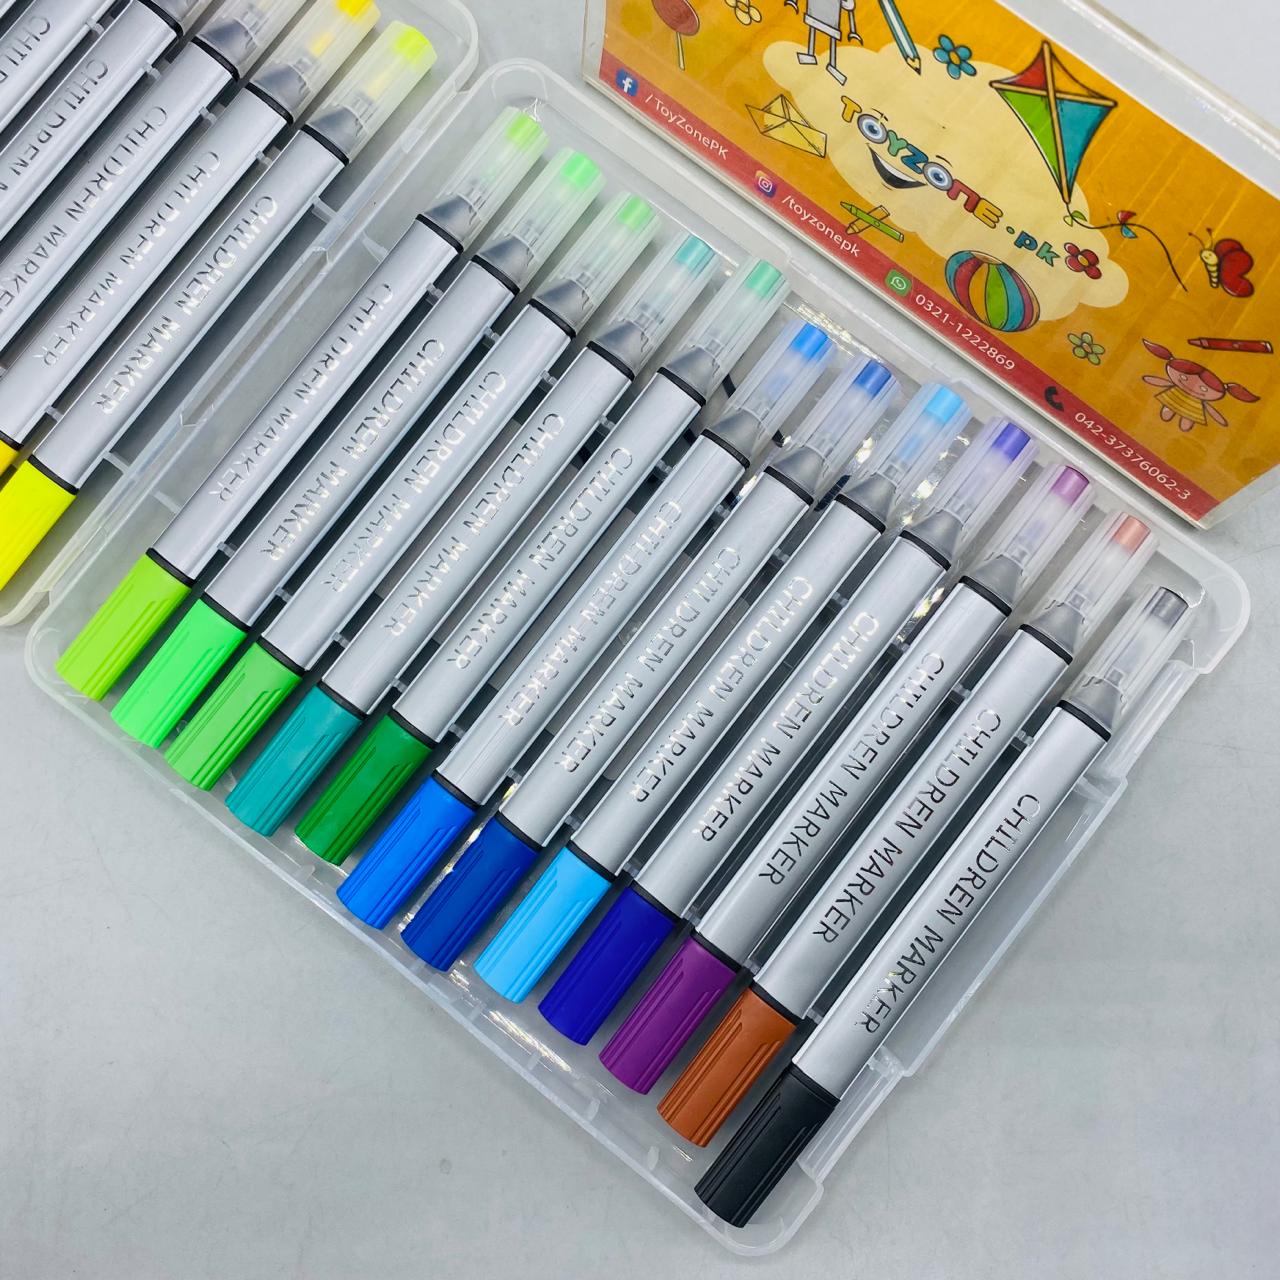 Double-Sided Art Marker Set (24 Colors)